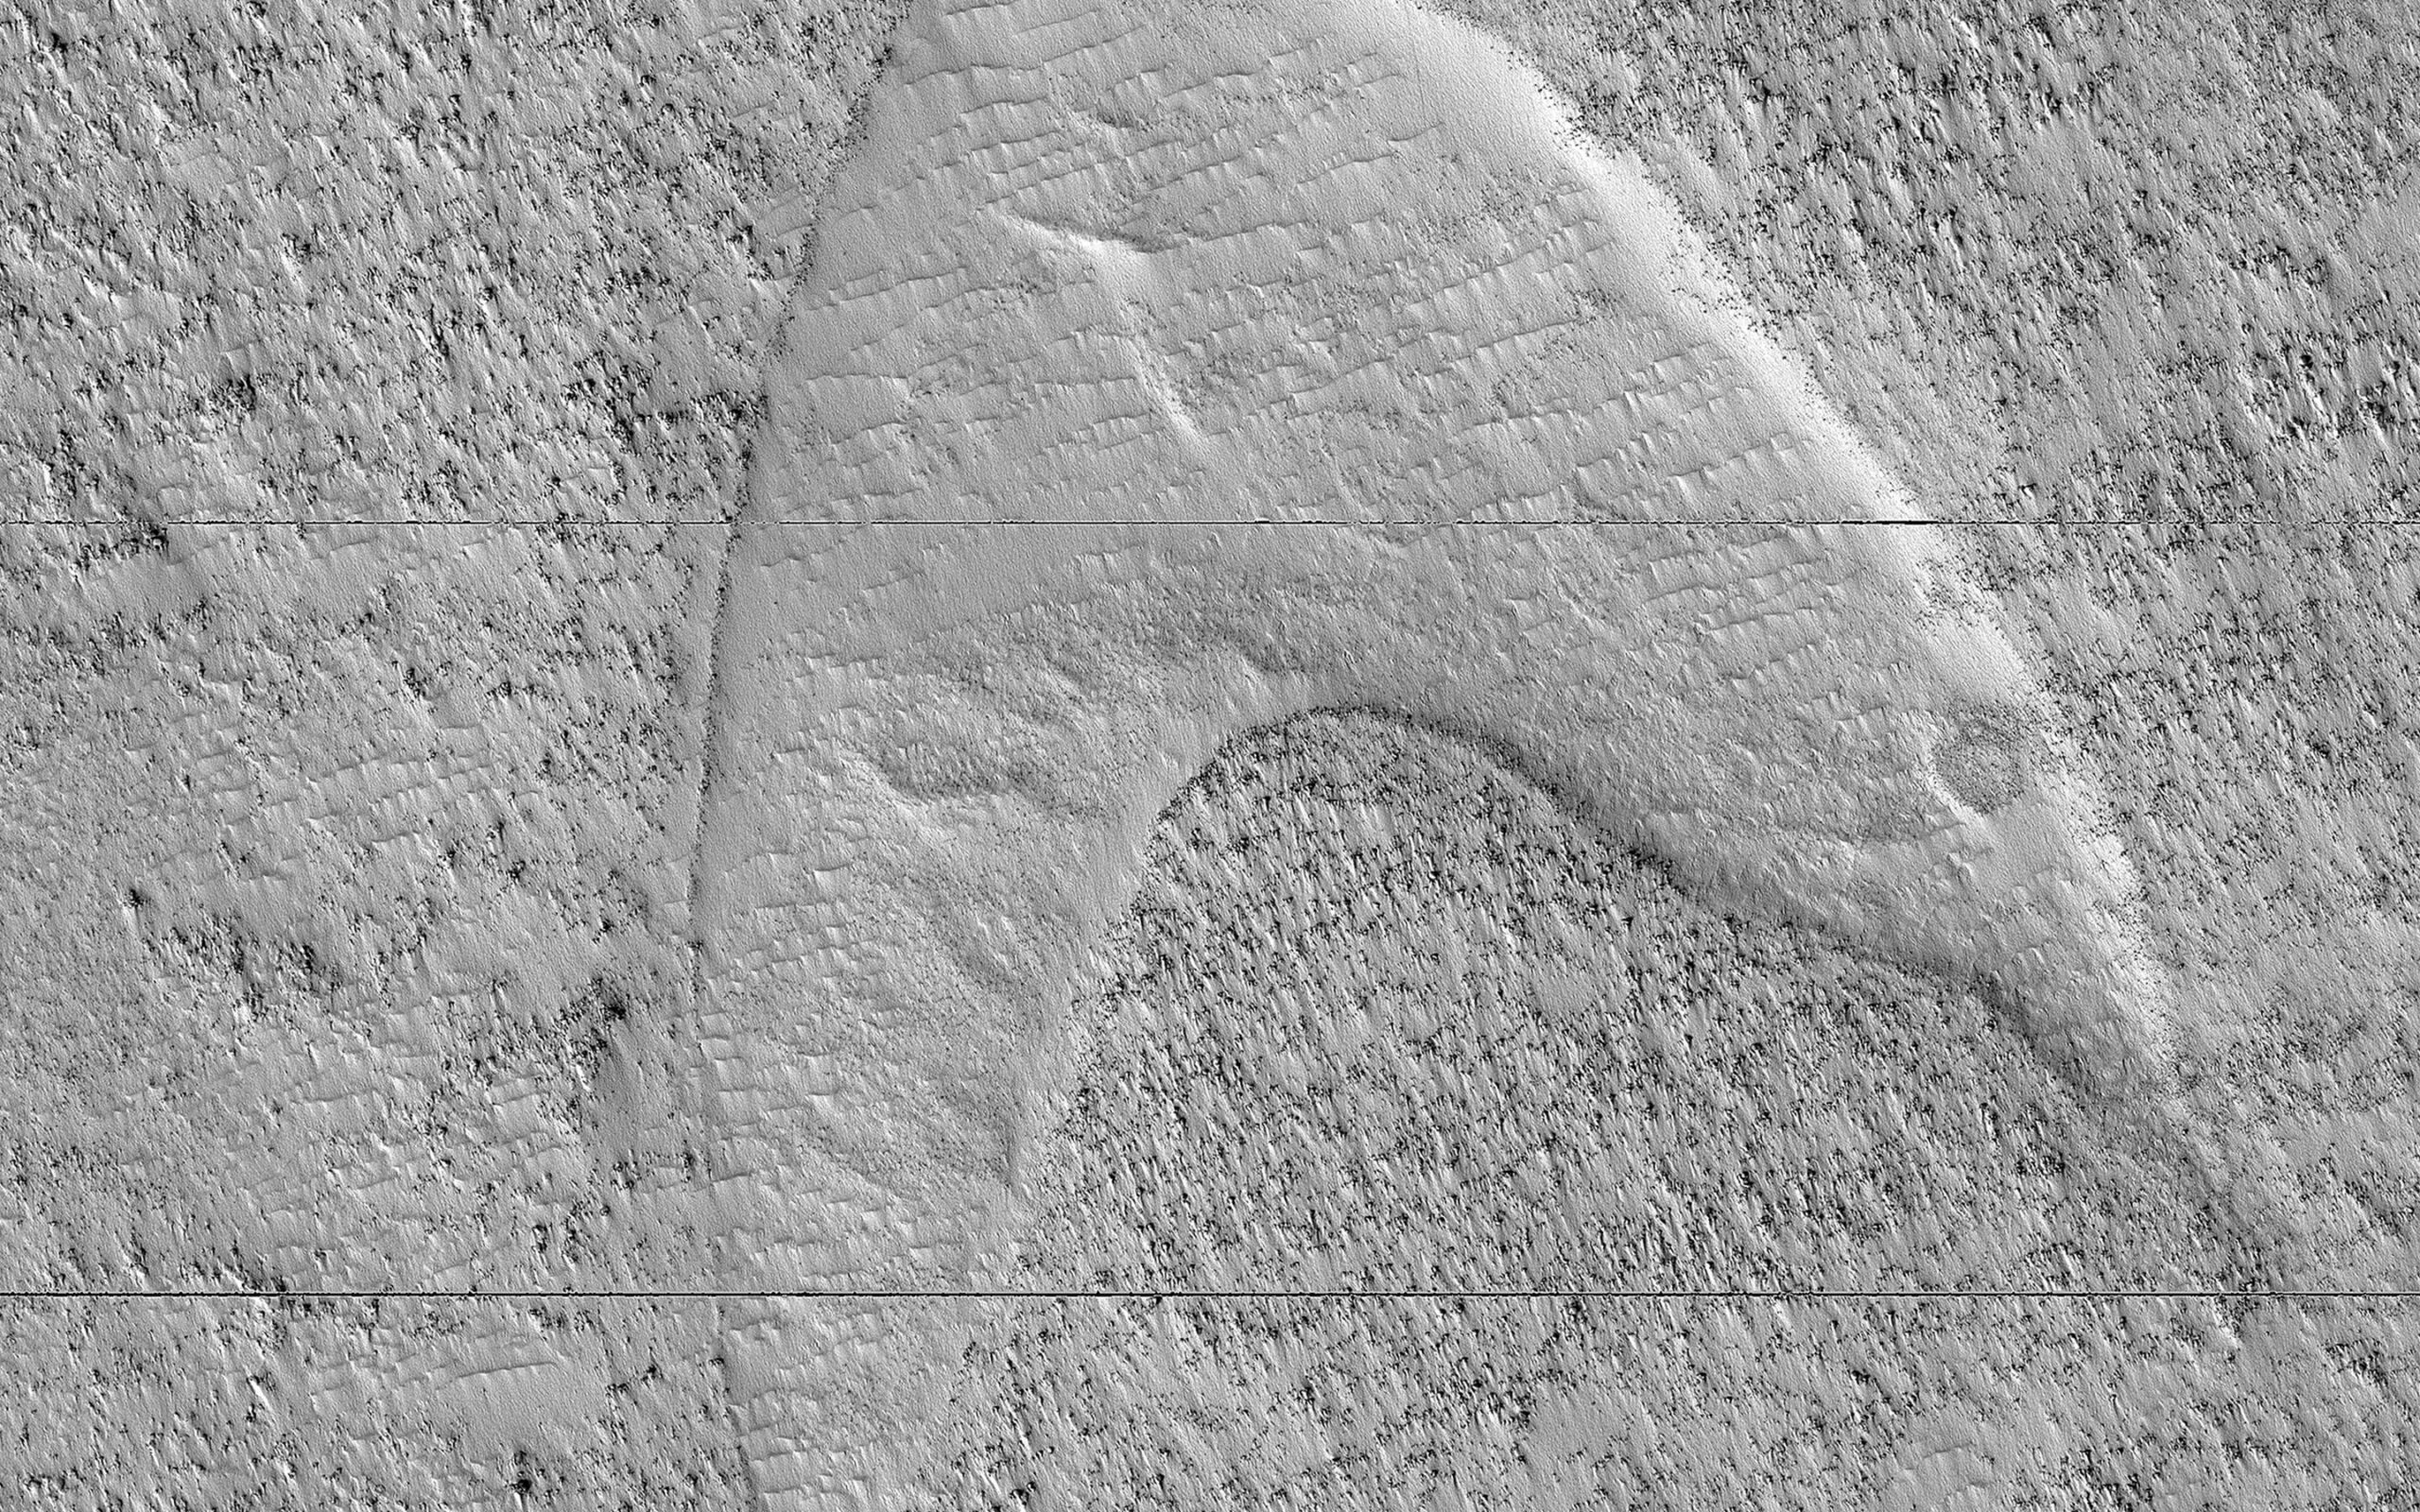 Redshirts on the red planet: Mars is sporting a giant Star Trek insignia